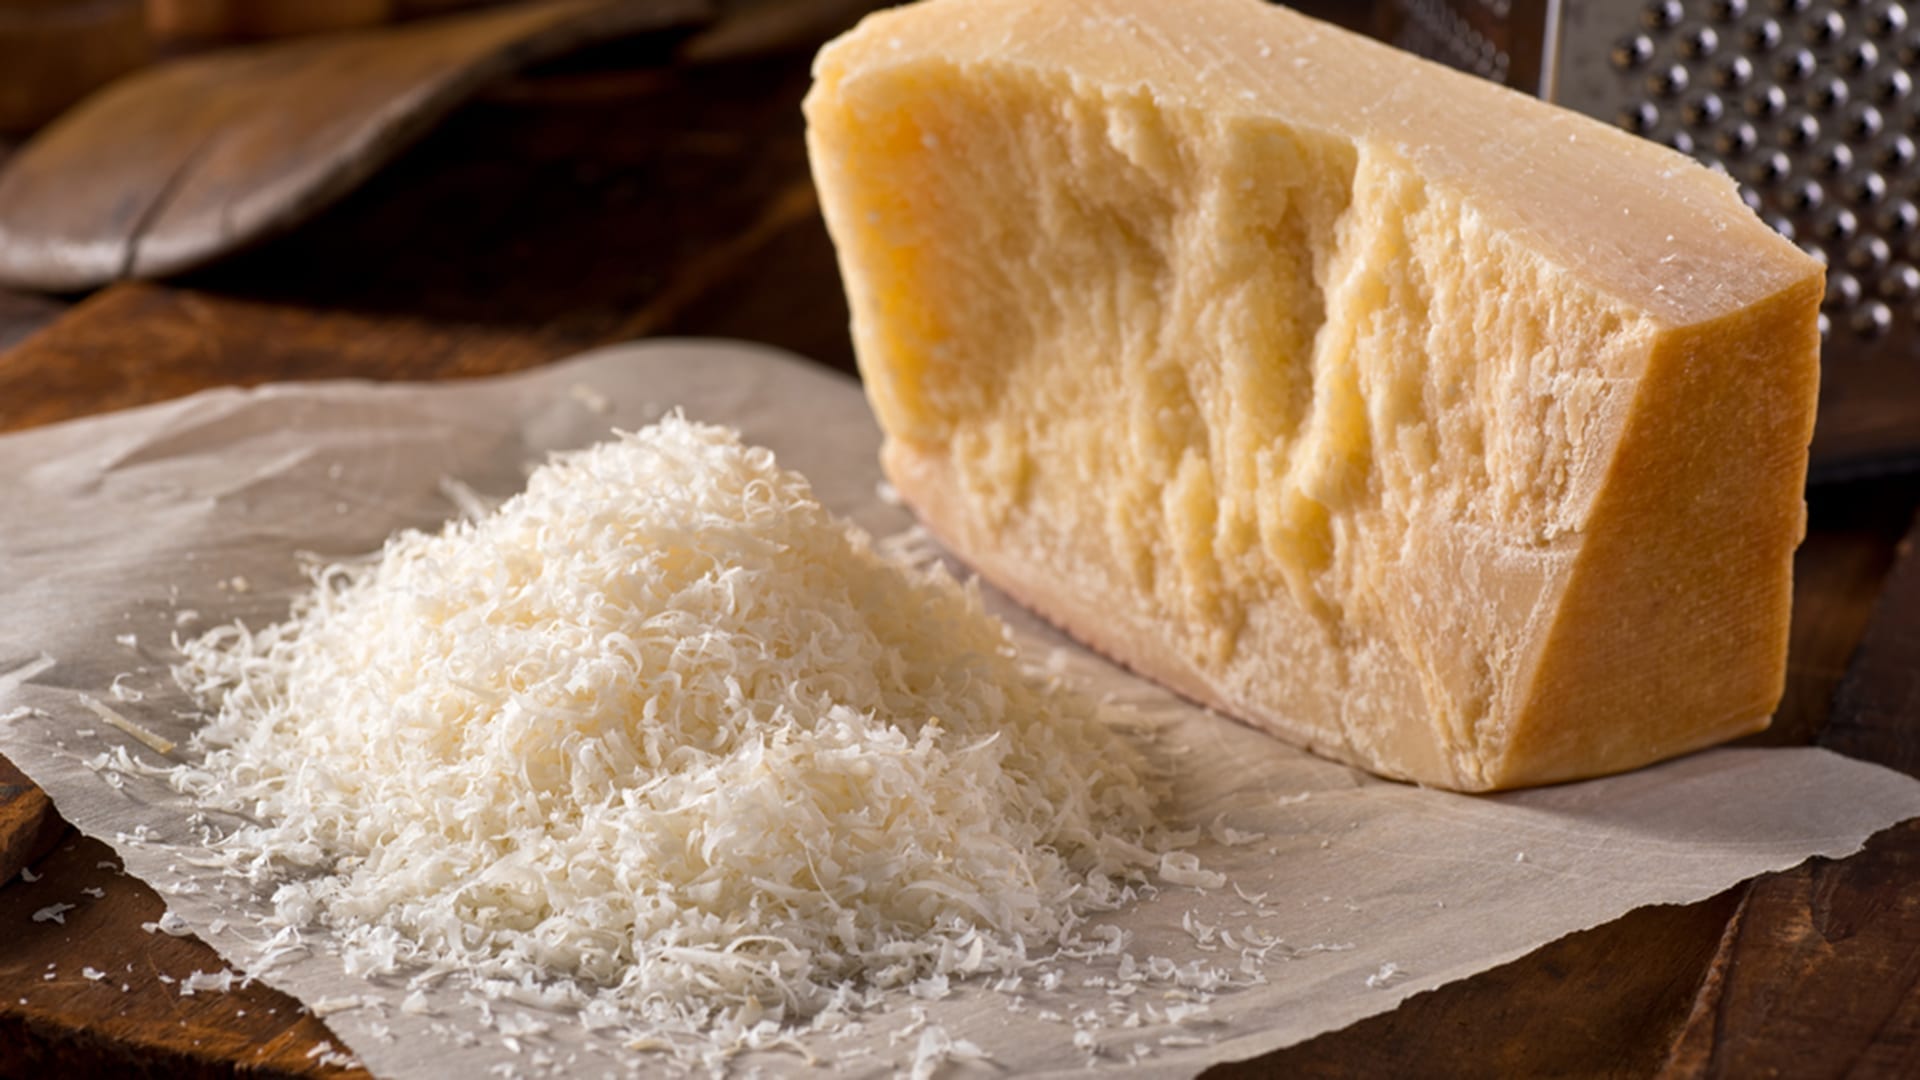 10 Cheesy Facts About the Parmesan Cheese That Came From Italy 5